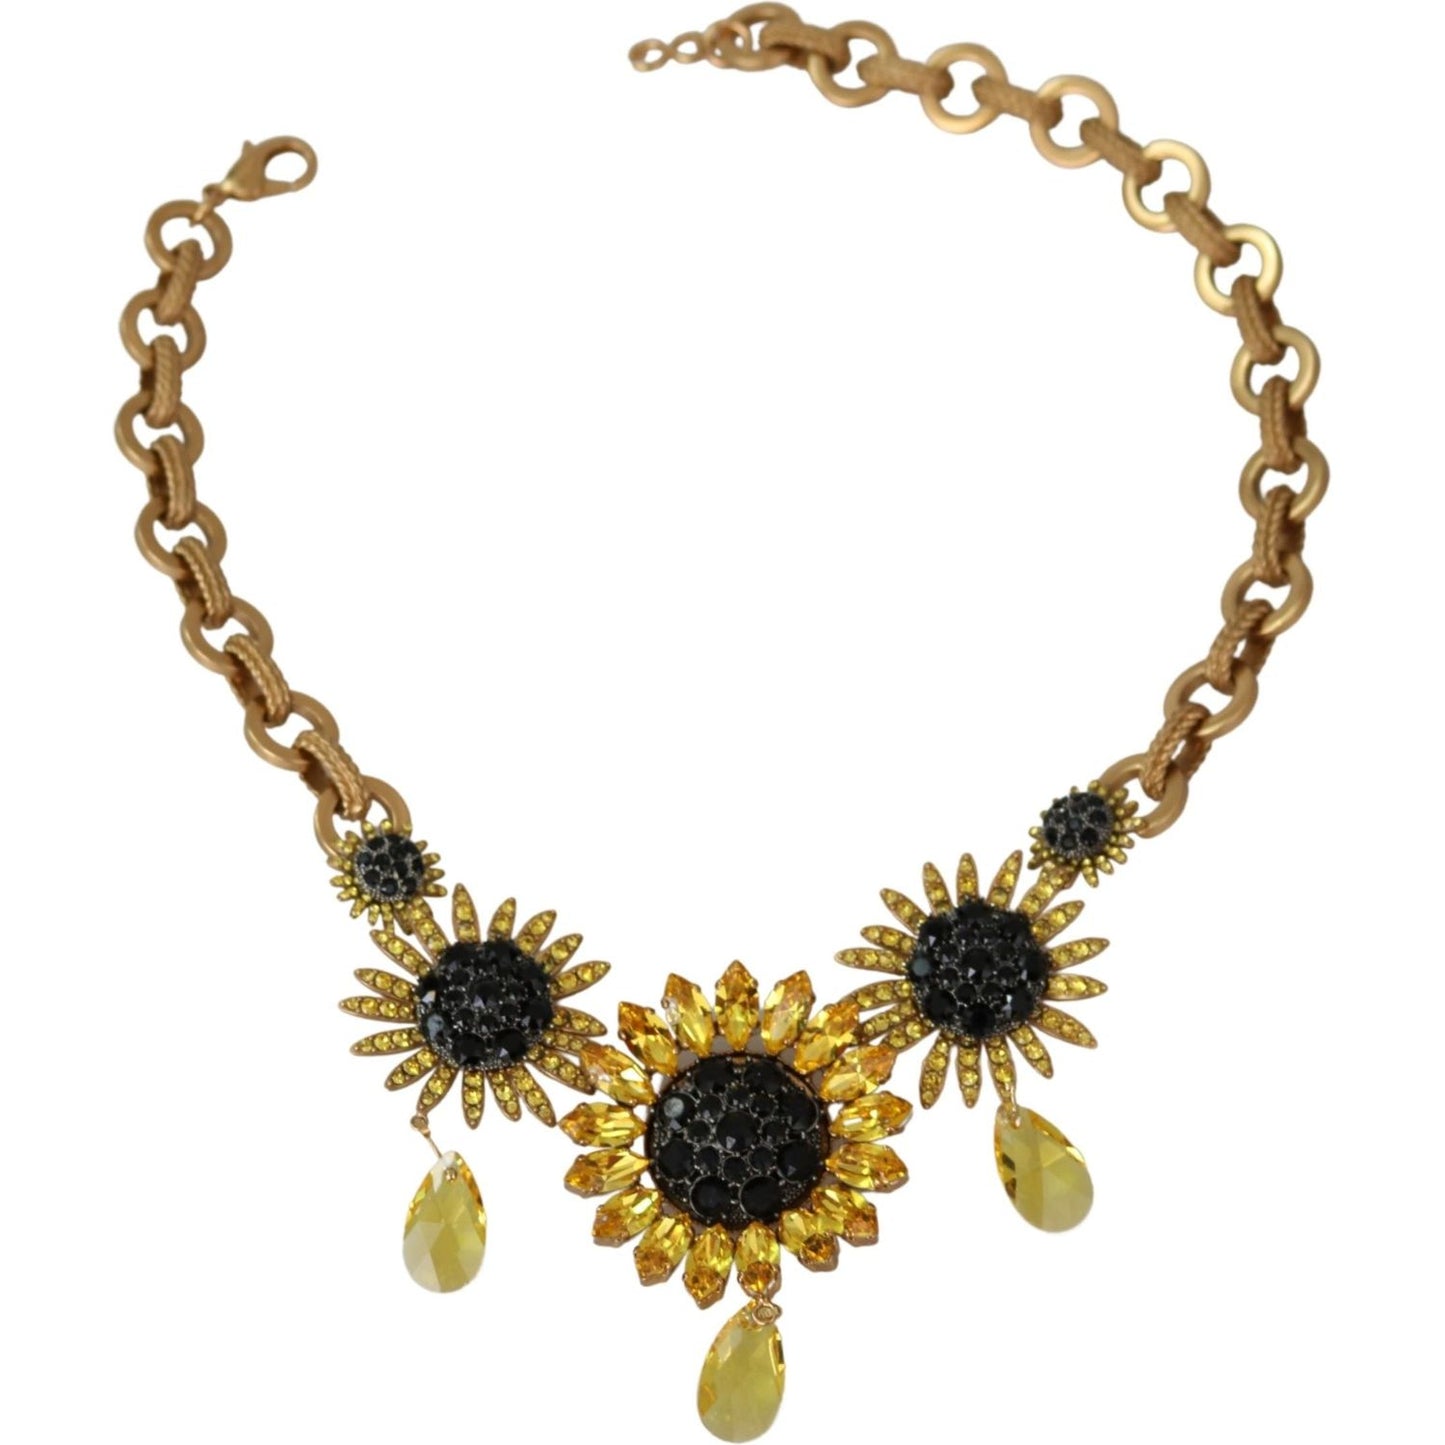 Dolce & Gabbana Elegant Gold Floral Crystal Statement Necklace Necklace gold-brass-chain-crystal-sunlower-pendants-necklace